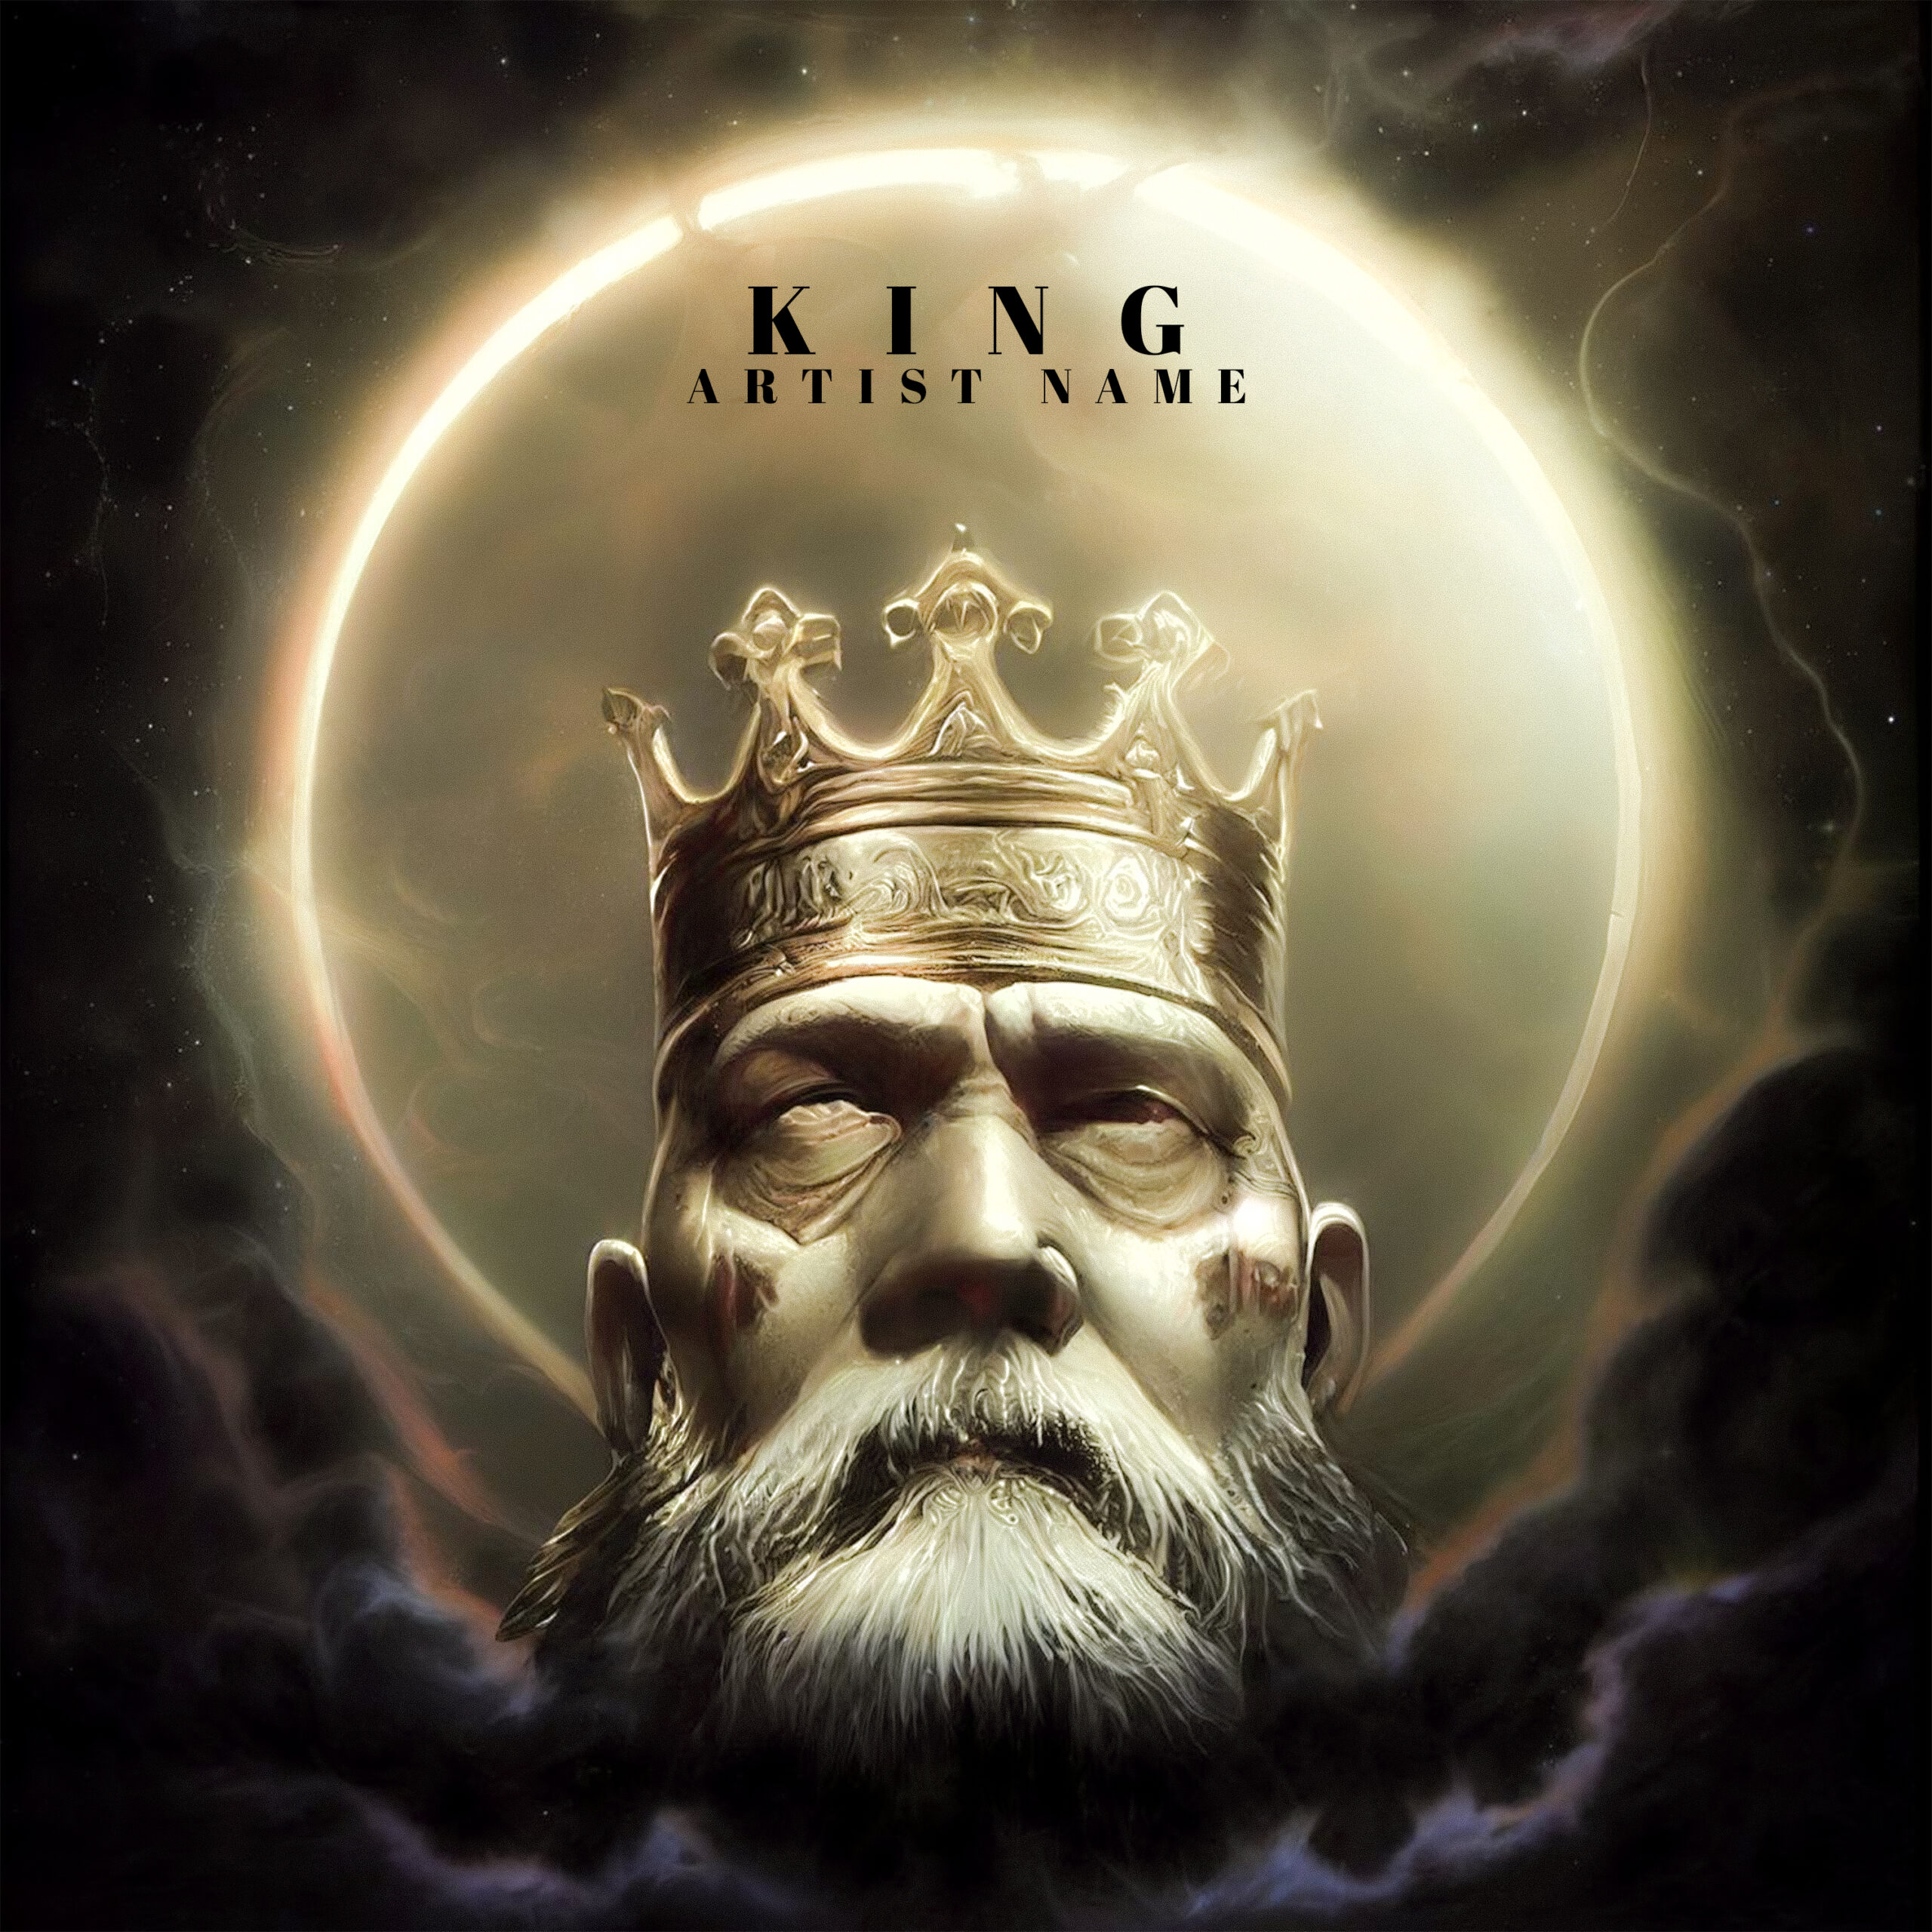 king Cover art is available for digital download, designed to fit album covers, singles, EPs, or mixtapes. Our pre-made album arts are fully prepared for purchase and come with a fast delivery guarantee. king Cover art is versatile and suits a wide range of music genres, including but not limited to Pop, Rap, Hip Hop, R&B, Soul, Rock, Post-Rock, Punk, Indie, Alternative, Psychedelic, Ambient, Chill, Dance, Electronic, Dubstep, EDM, Hardcore, House, Techno, Trance, Fantasy, Folk, World, Dark, Metal, Heavy Metal, Thrash Metal, Metalcore, Death Metal, Doom Metal, Black Metal, Instrumental, Soundtrack, and various other music genres. Outsource your album art. our is to create professional graphic designs and illustrations that elevate musicians, producers, bands, and artists’ music into visual imagery.